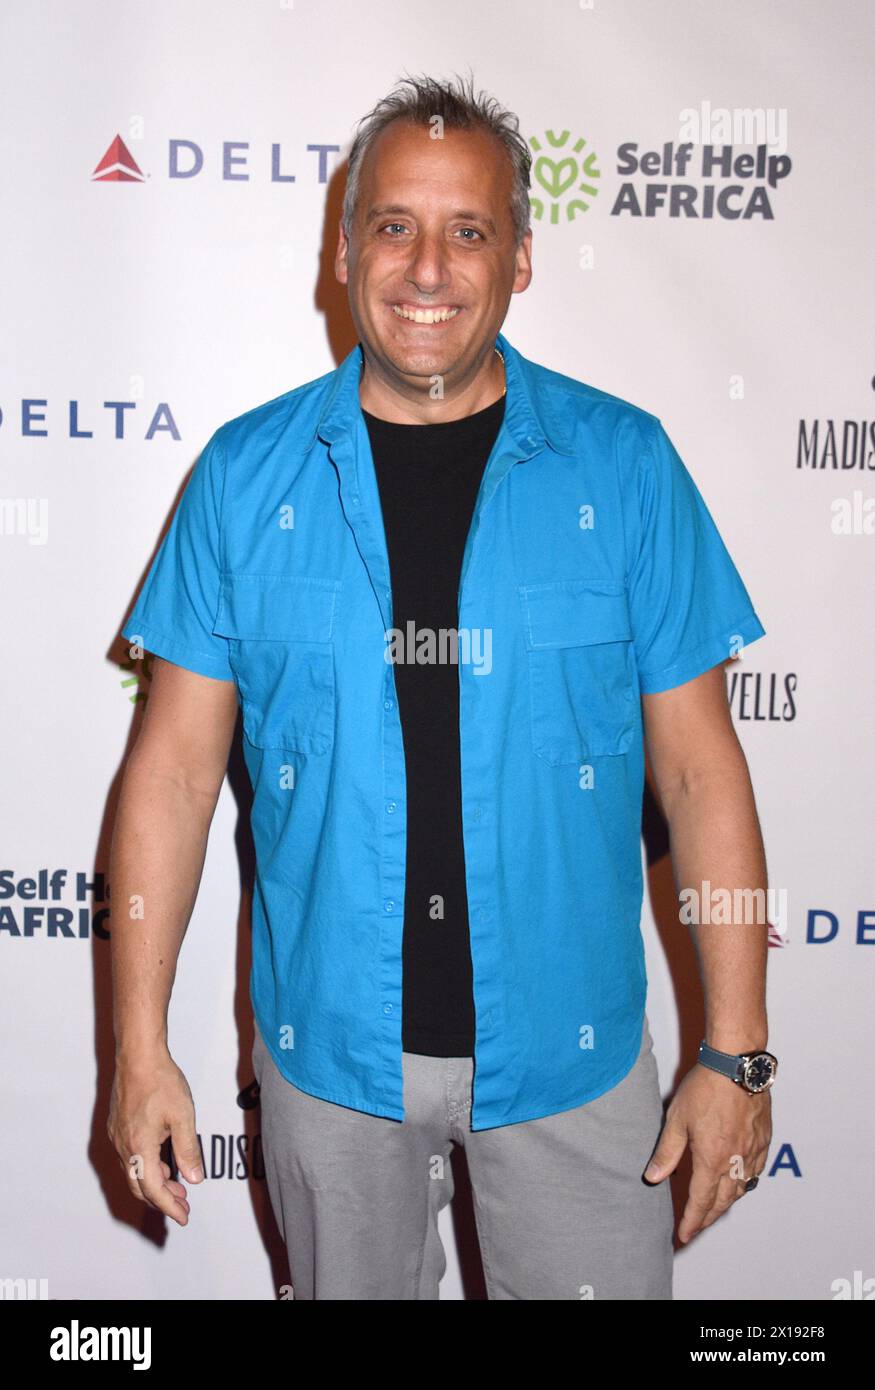 New York, NY, USA. April 2024. Joe Gatto beim 9. Jährlichen Broadway for Self Help Africa Benefit Concert im Cutting Room am 15. April 2024 in New York City. Quelle: Mpi099/Media Punch/Alamy Live News Stockfoto